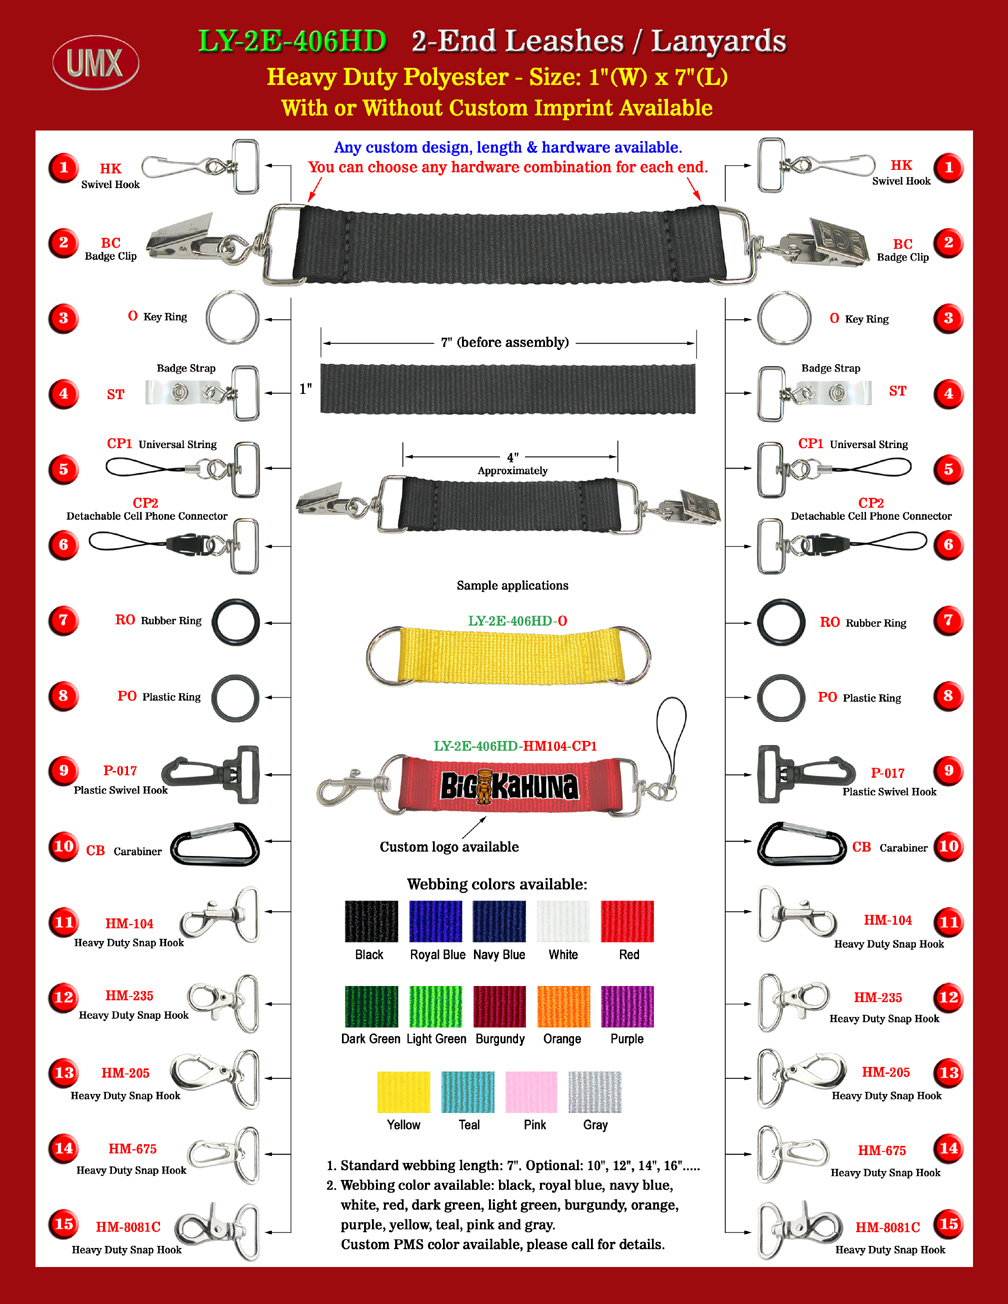 The 1" heavy duty polyester leash straps are great for making pet or dog leash, tool holder leash, ski board retainer, or snowboard leash etc.